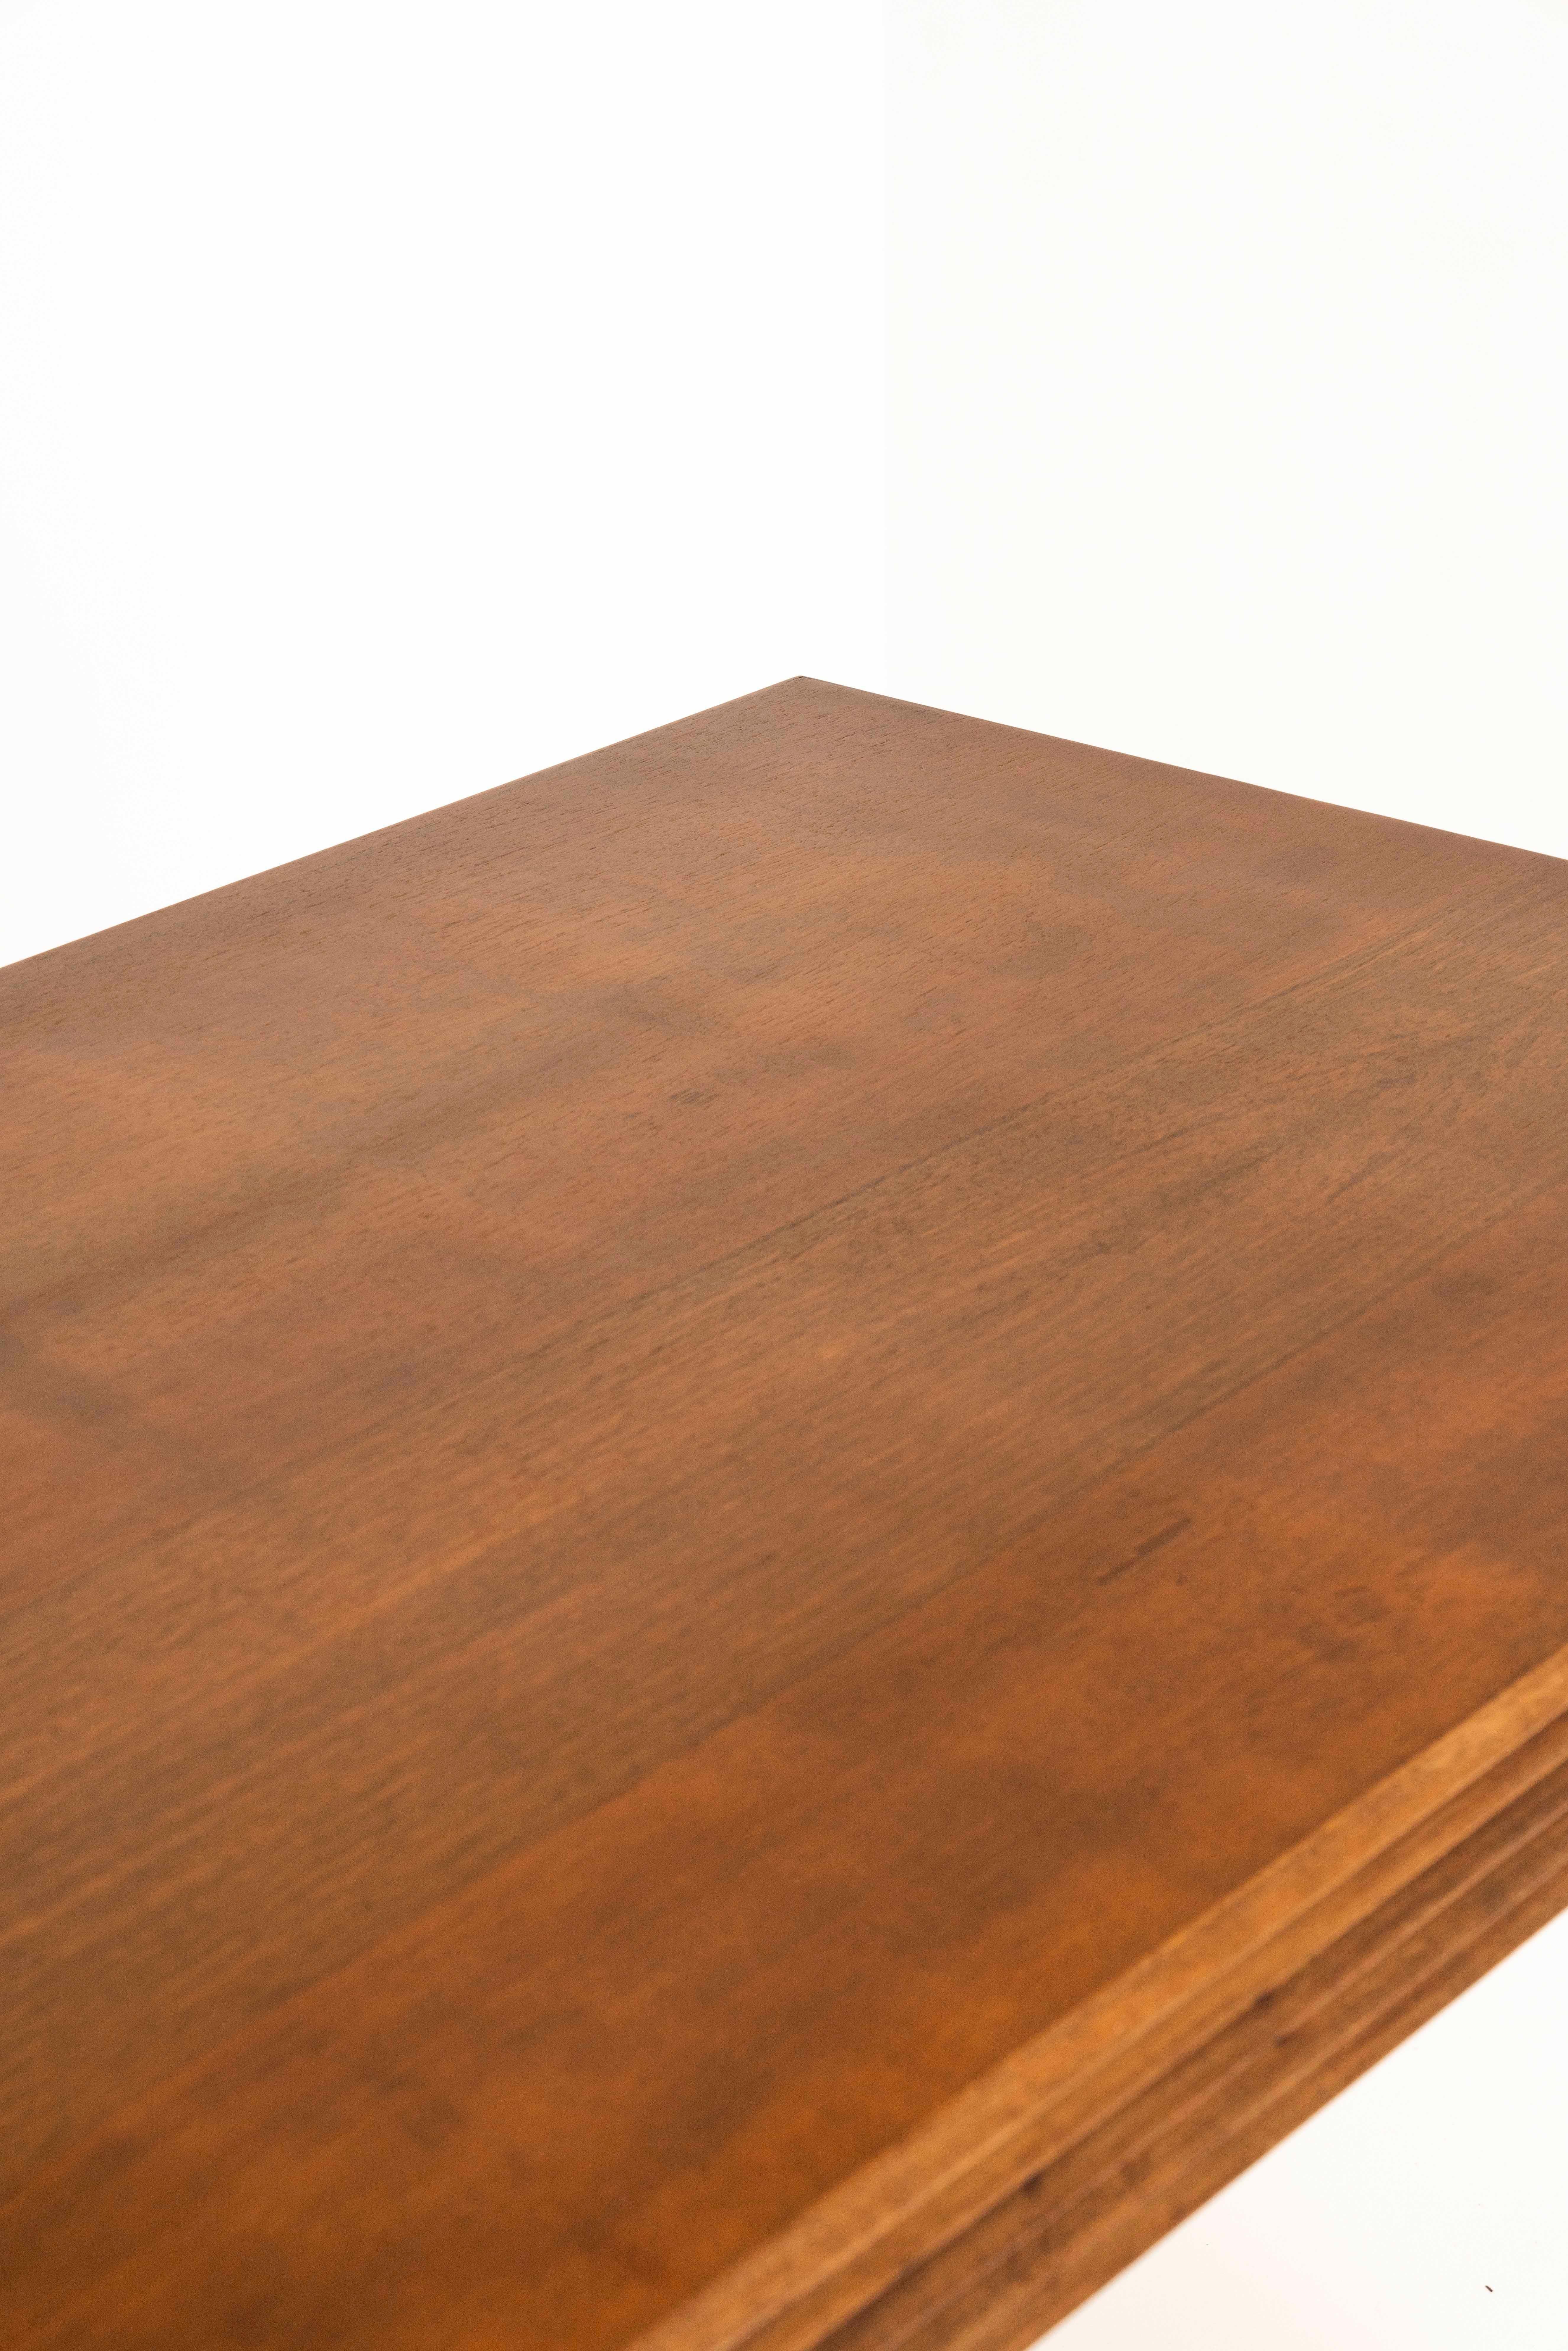 Wood Gio Ponti Dining Table in Veneered Walnut, Italy 1940s For Sale